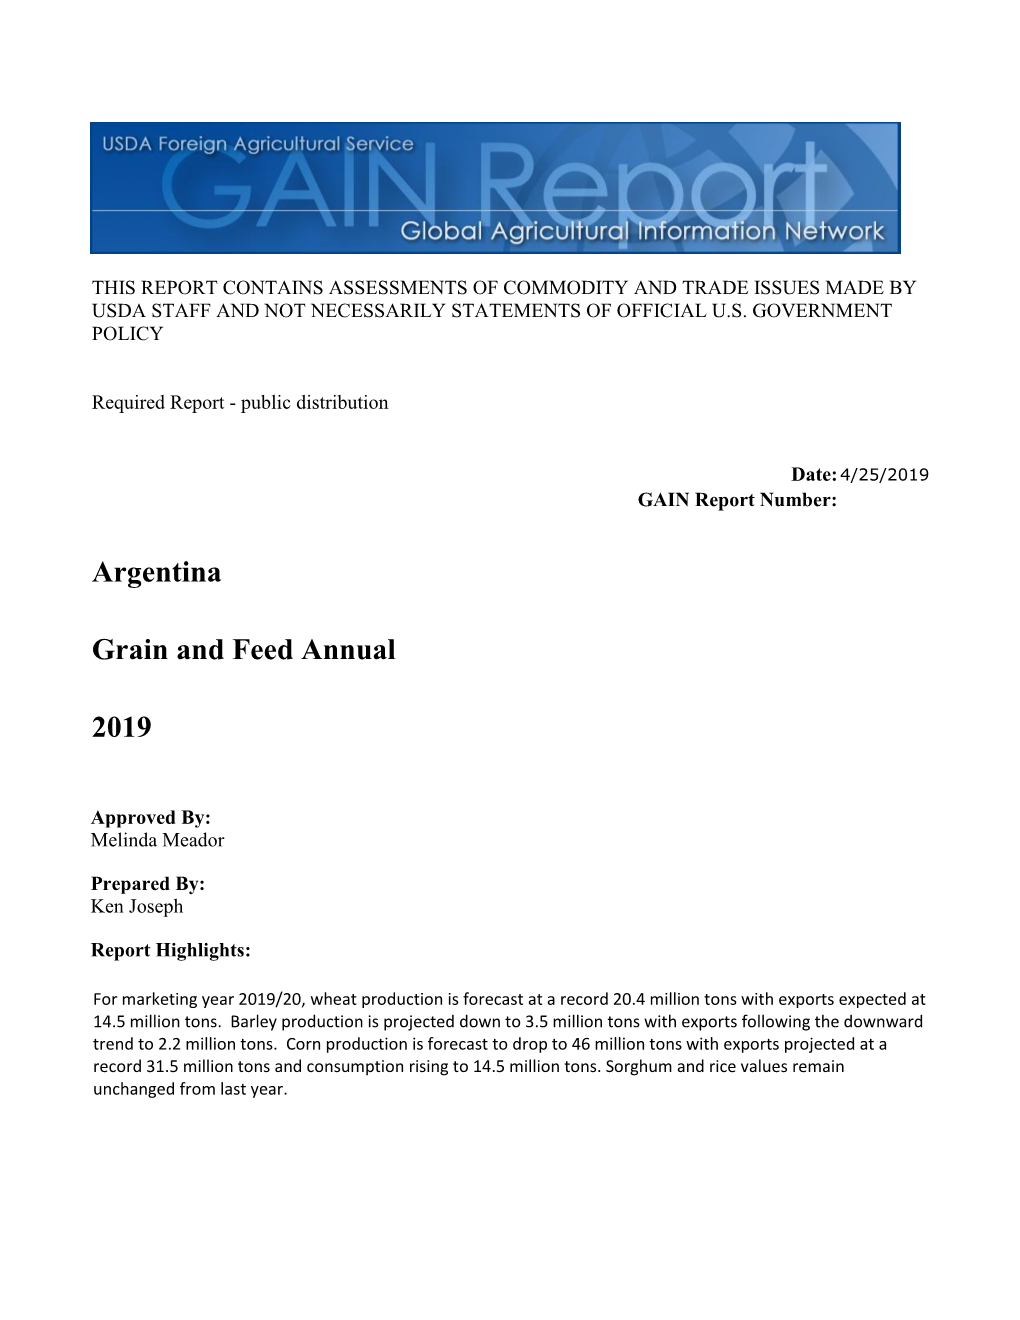 Argentina Grain and Feed Annual 2019